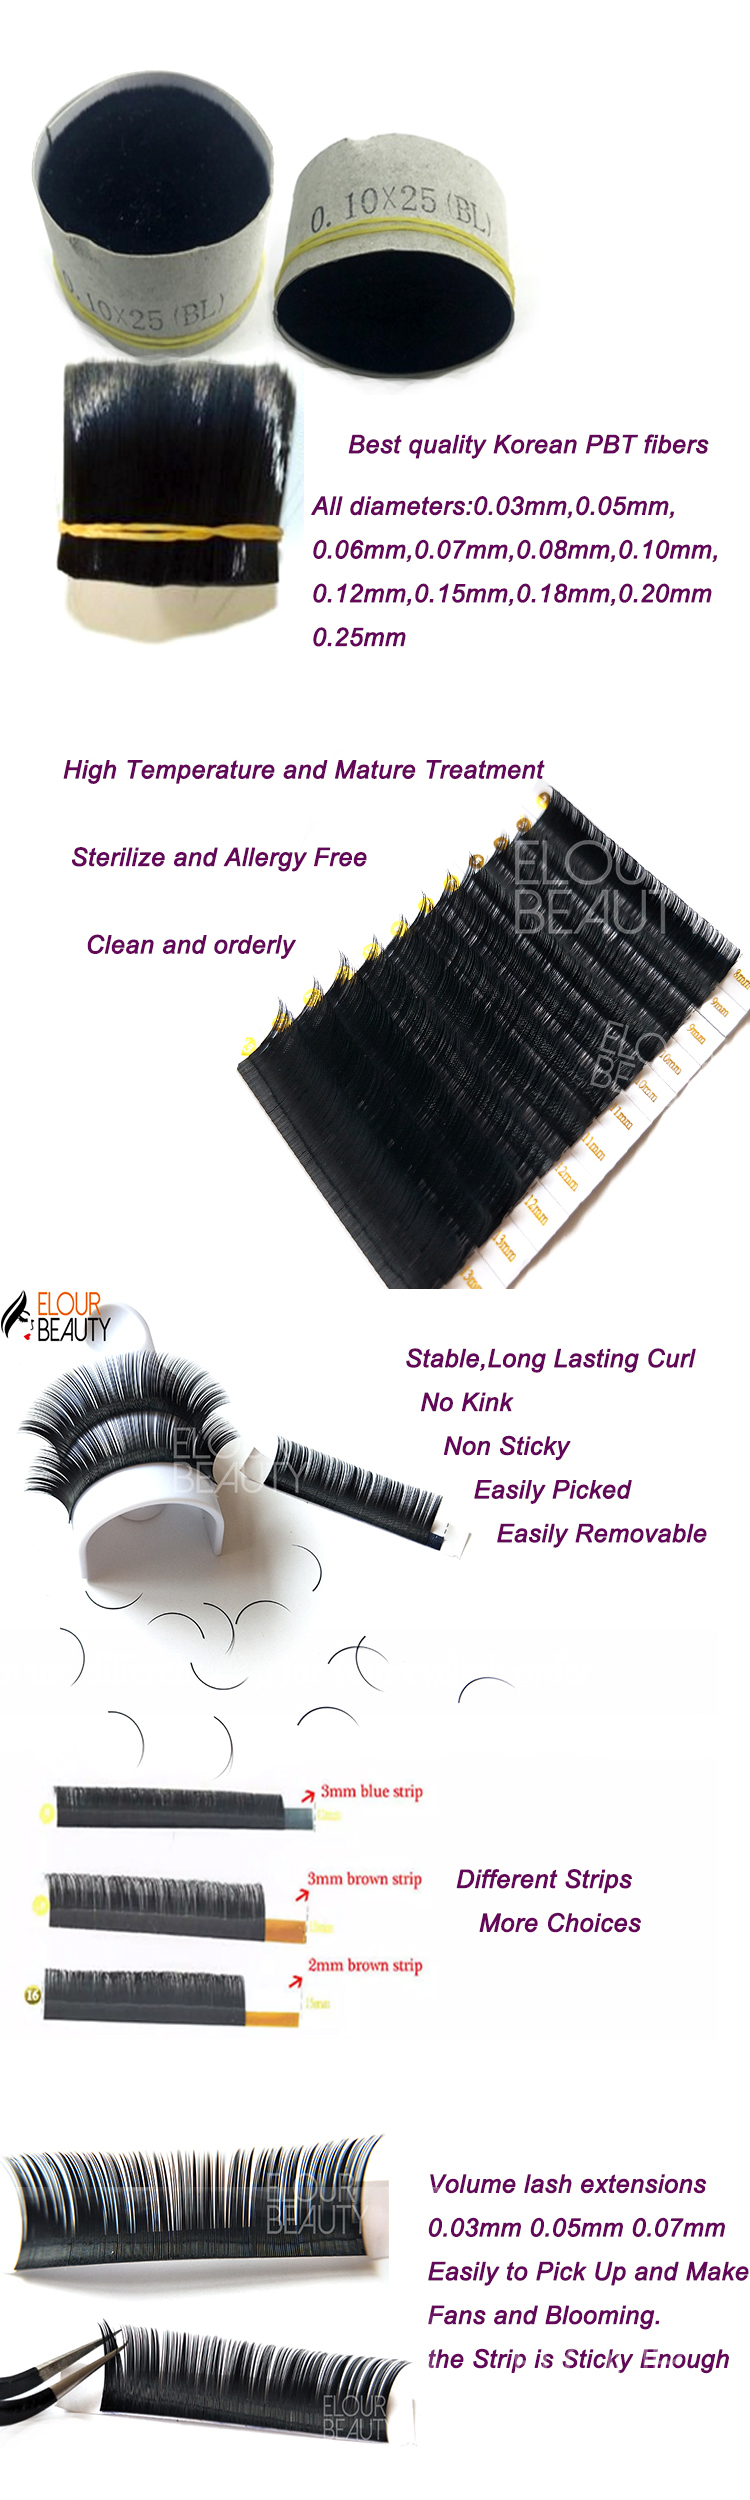 wholesale lash extensions manufactures China.jpg